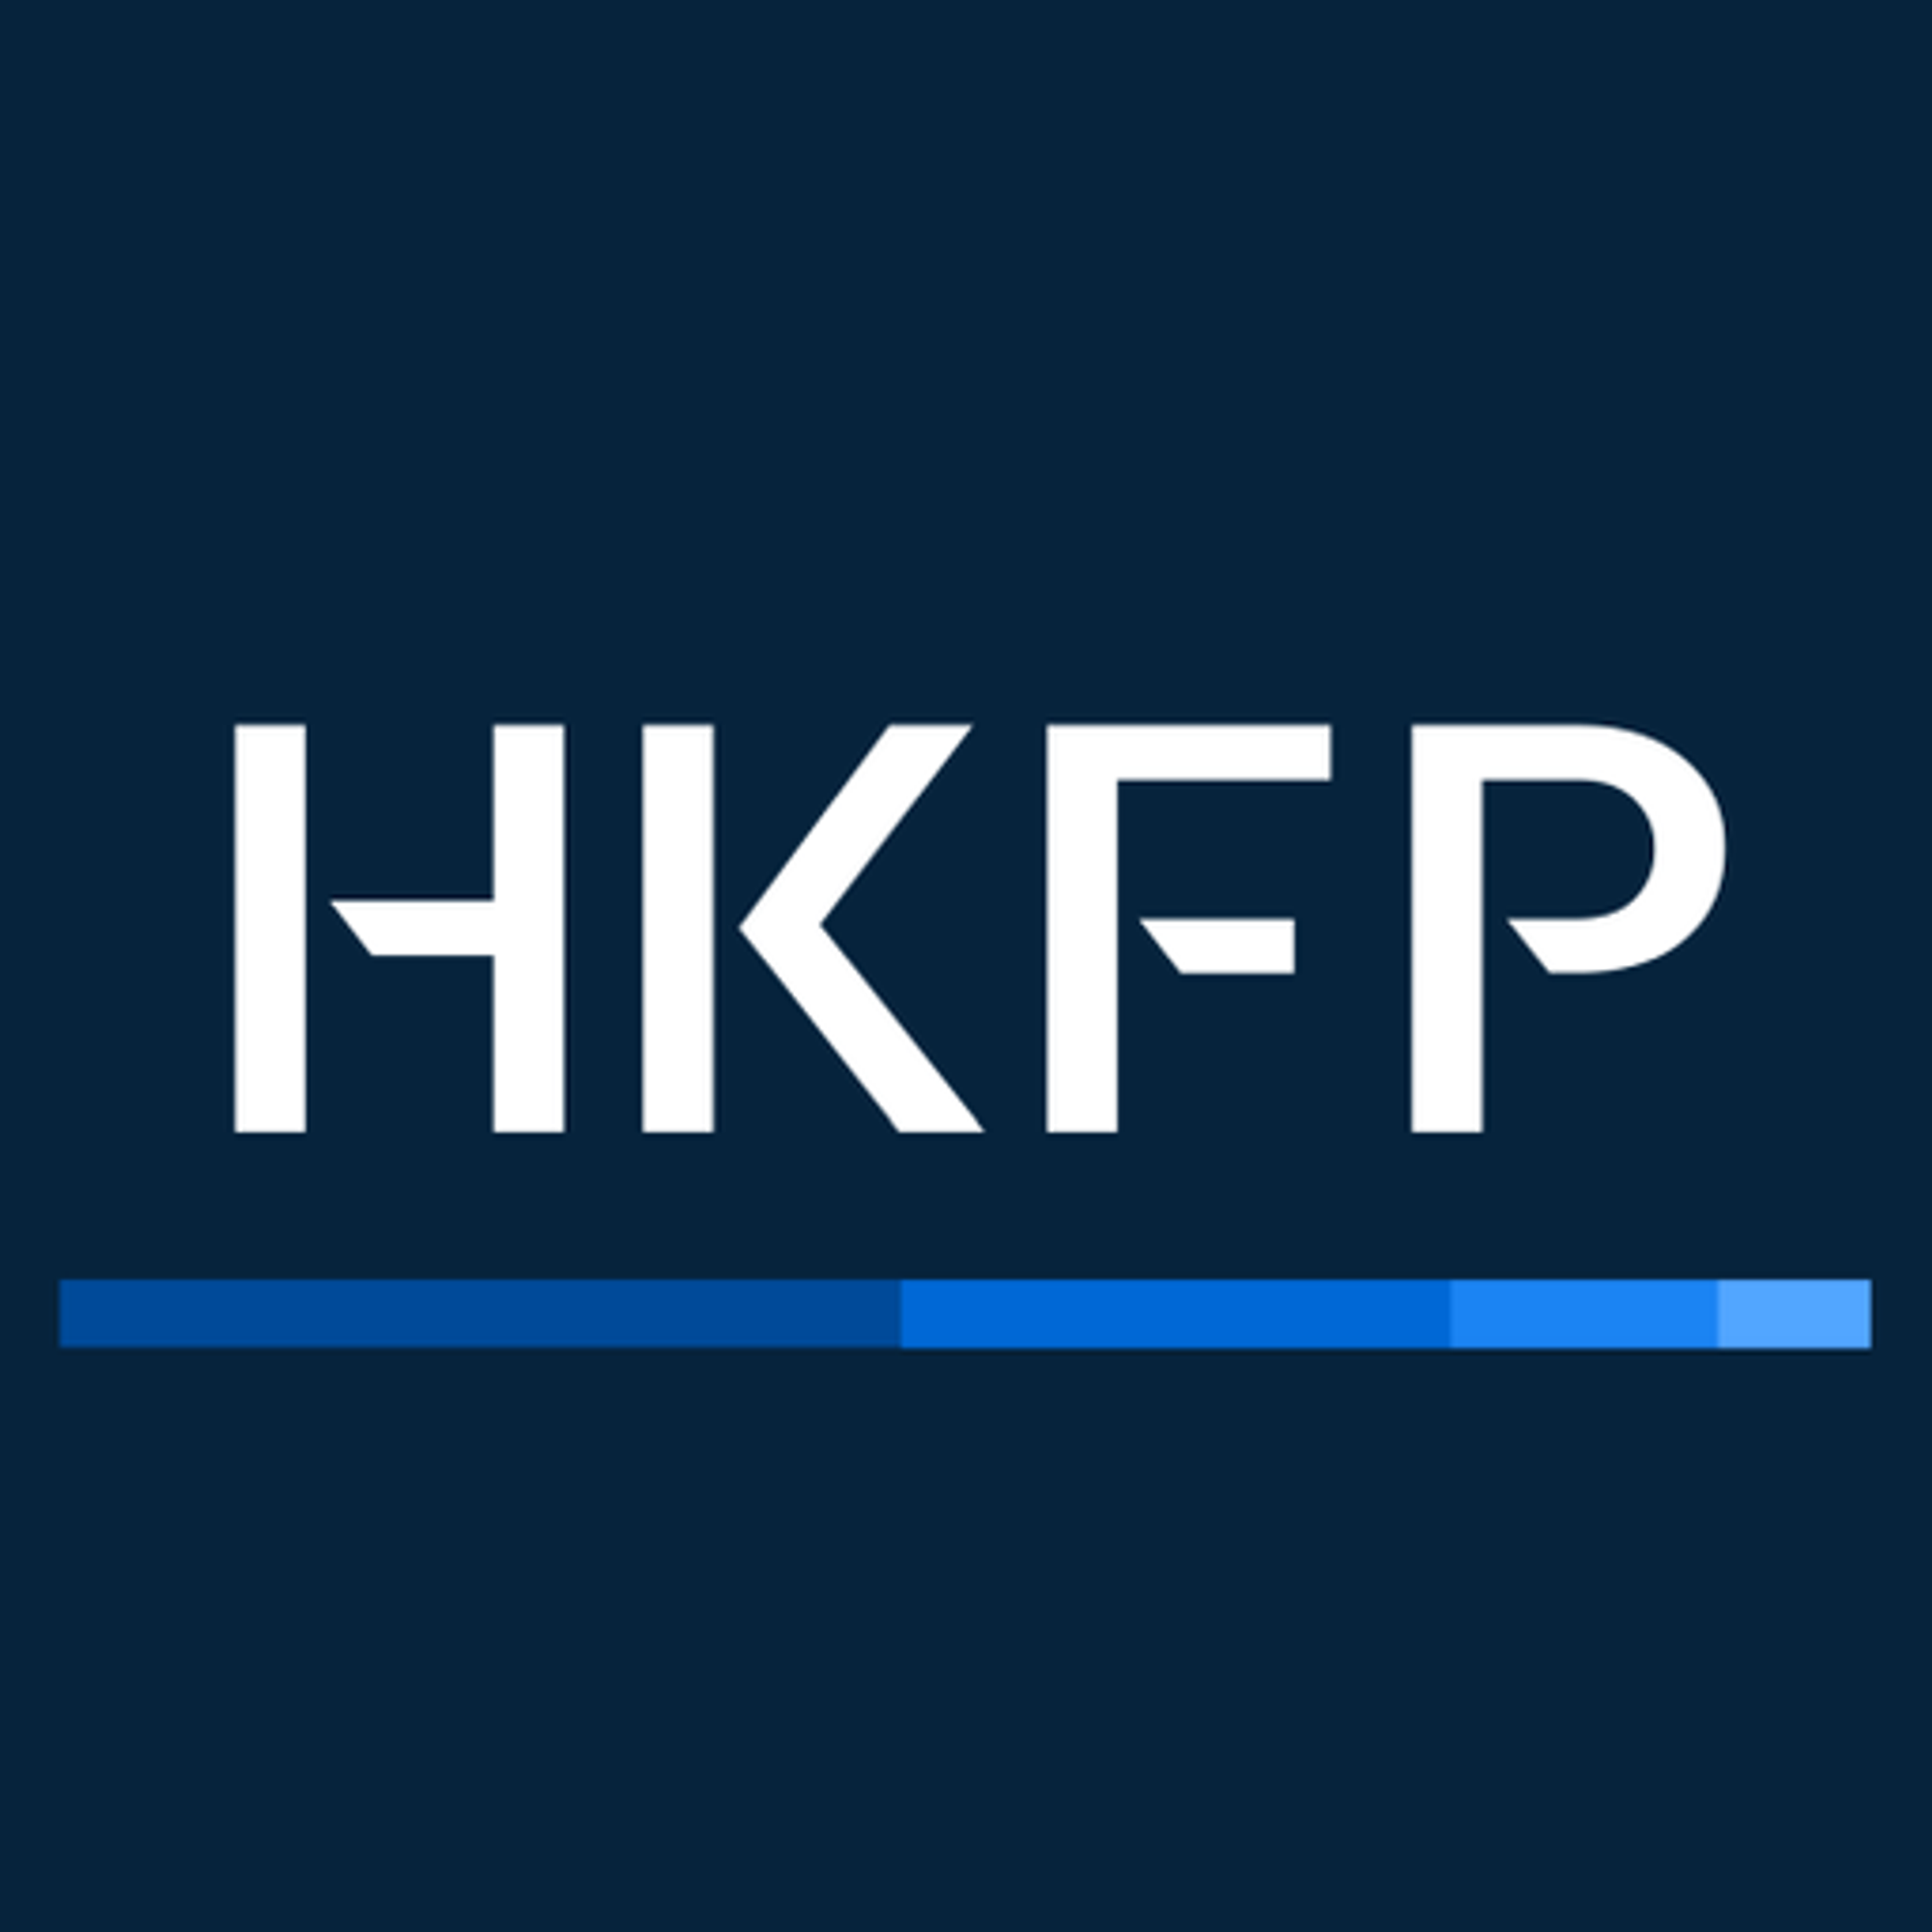 HKFP Guide: How to support Hong Kong's refugees, domestic workers & most vulnerable during Covid-19 | Hong Kong Free Press HKFP